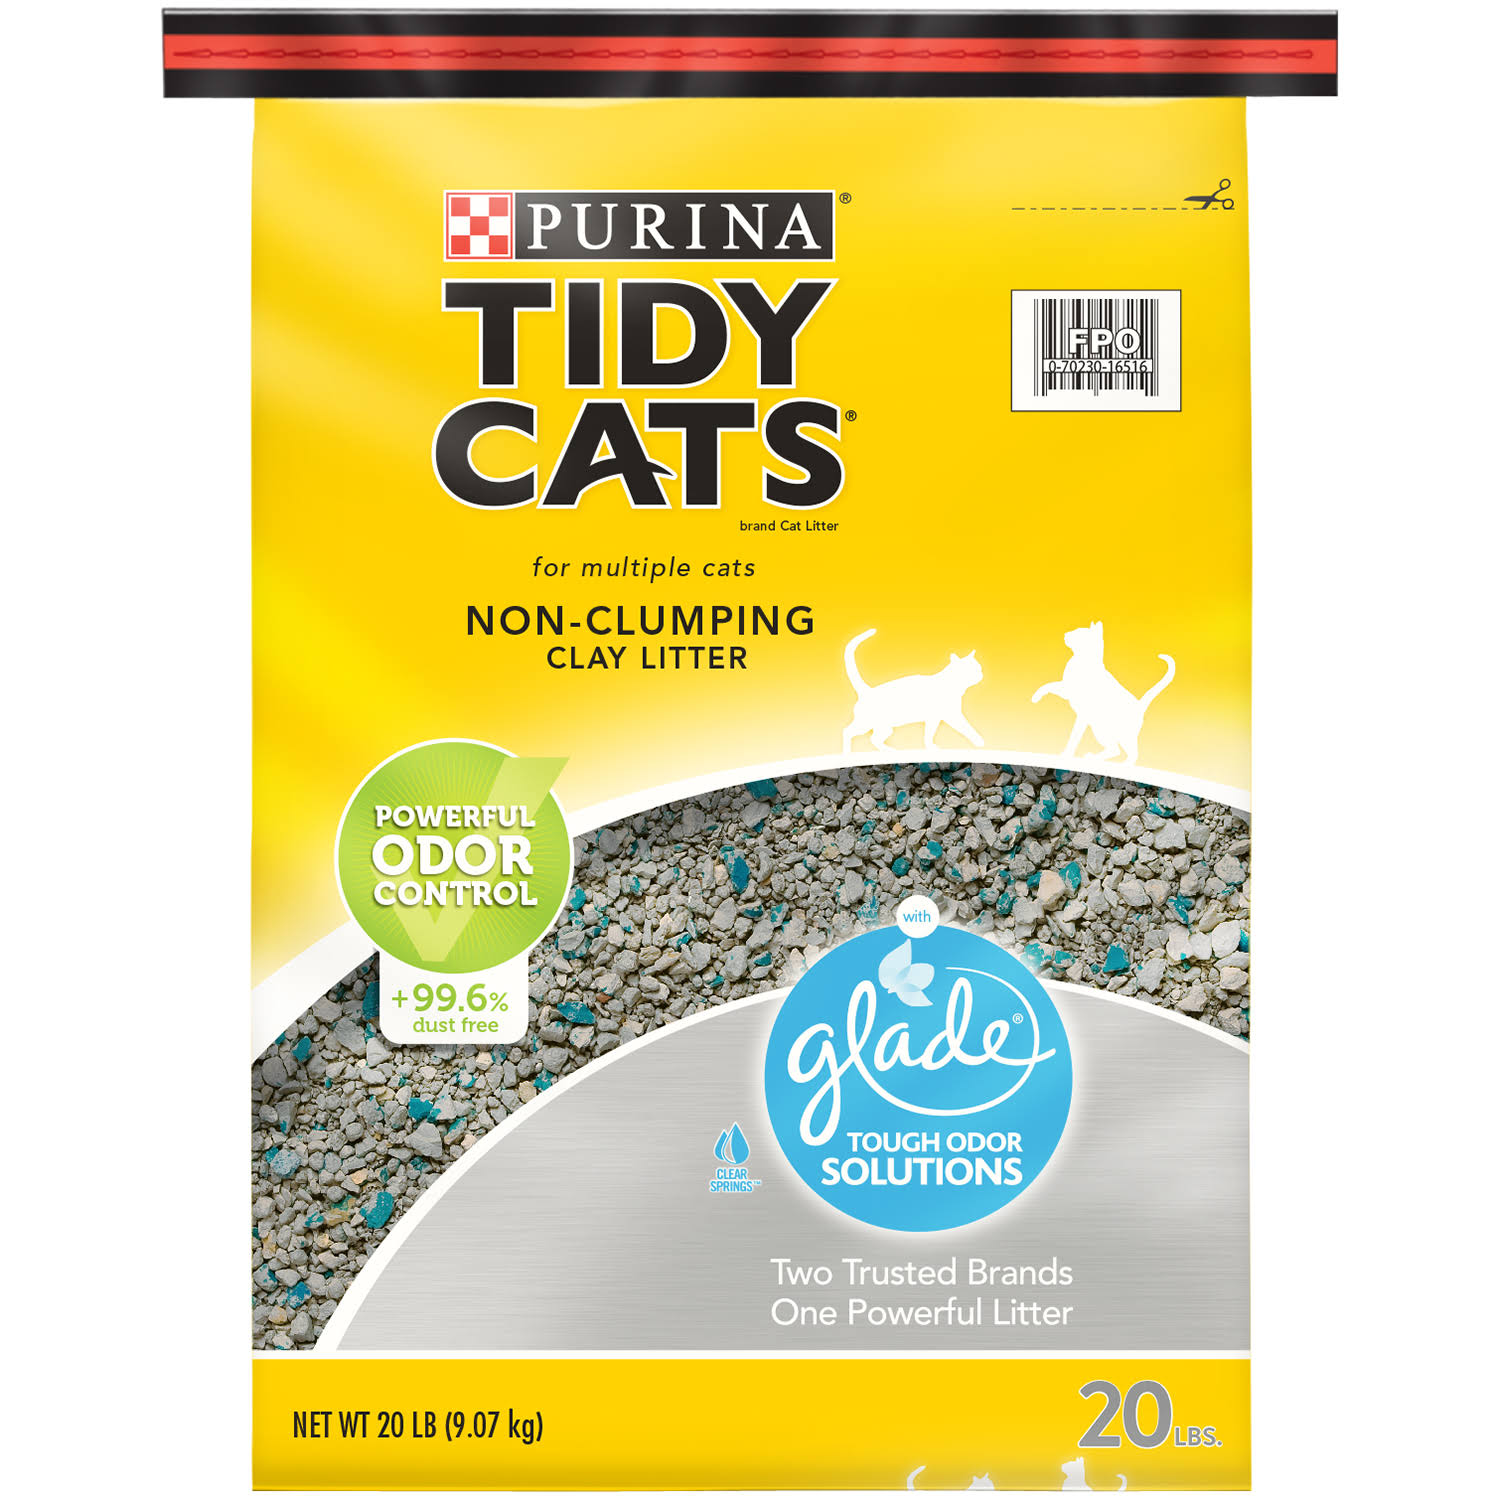 Purina Tidy Cats Non-clumping Cat Litter - with Glade Tough Odor Solutions, 20lbs